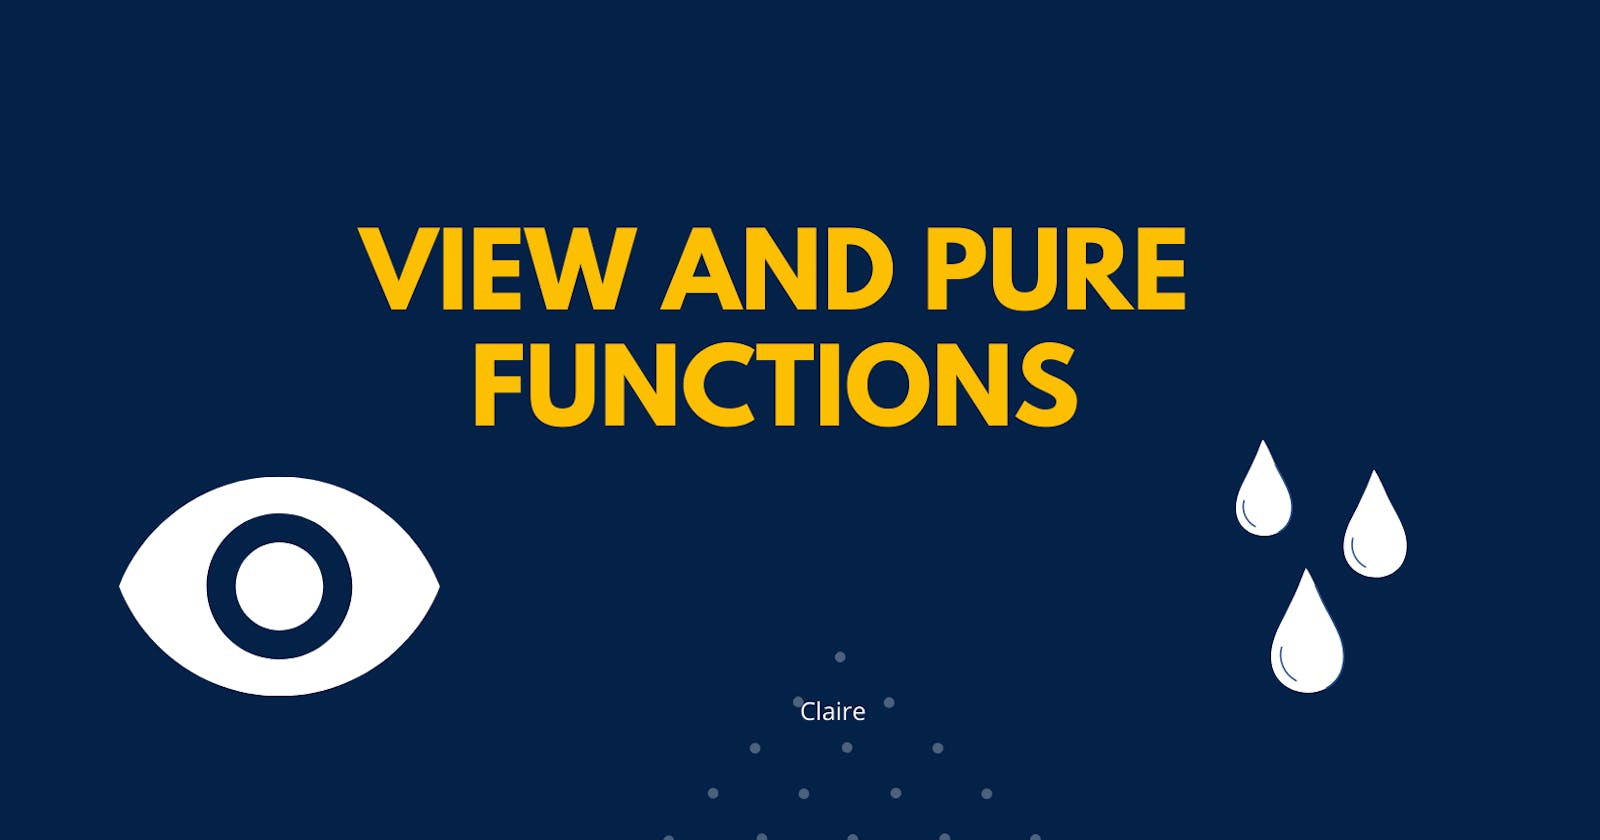 View and Pure Functions